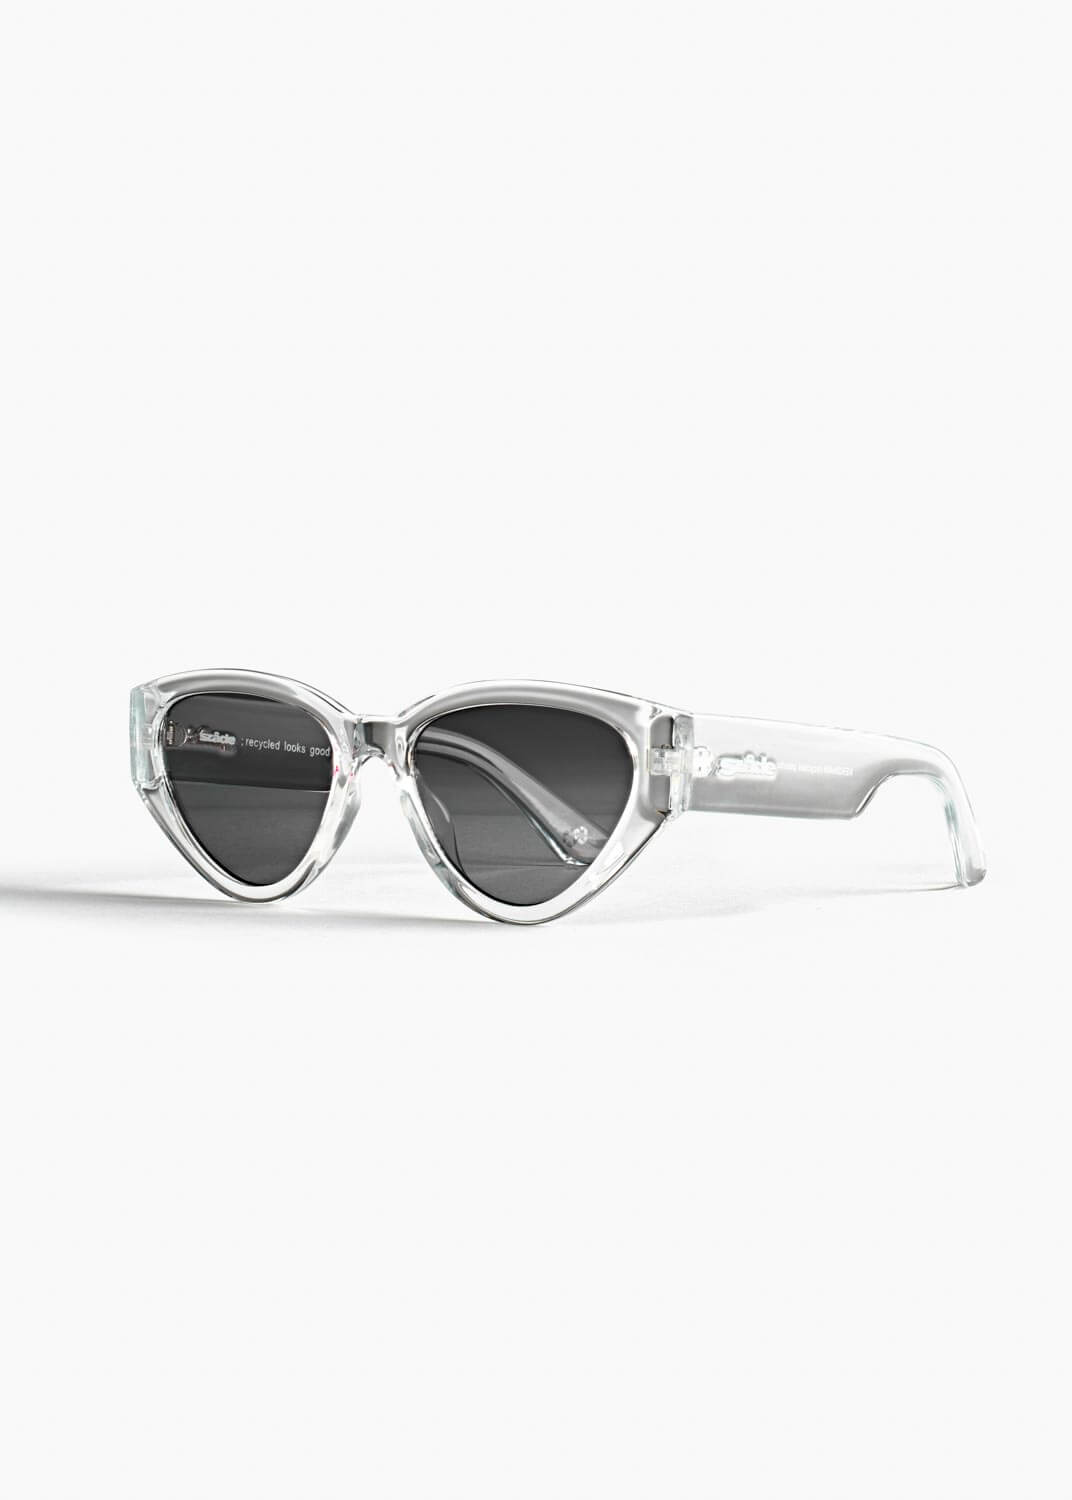 Szade RECYCLED SUNGLASSES  Szade - Kershaw in Glass/Ink